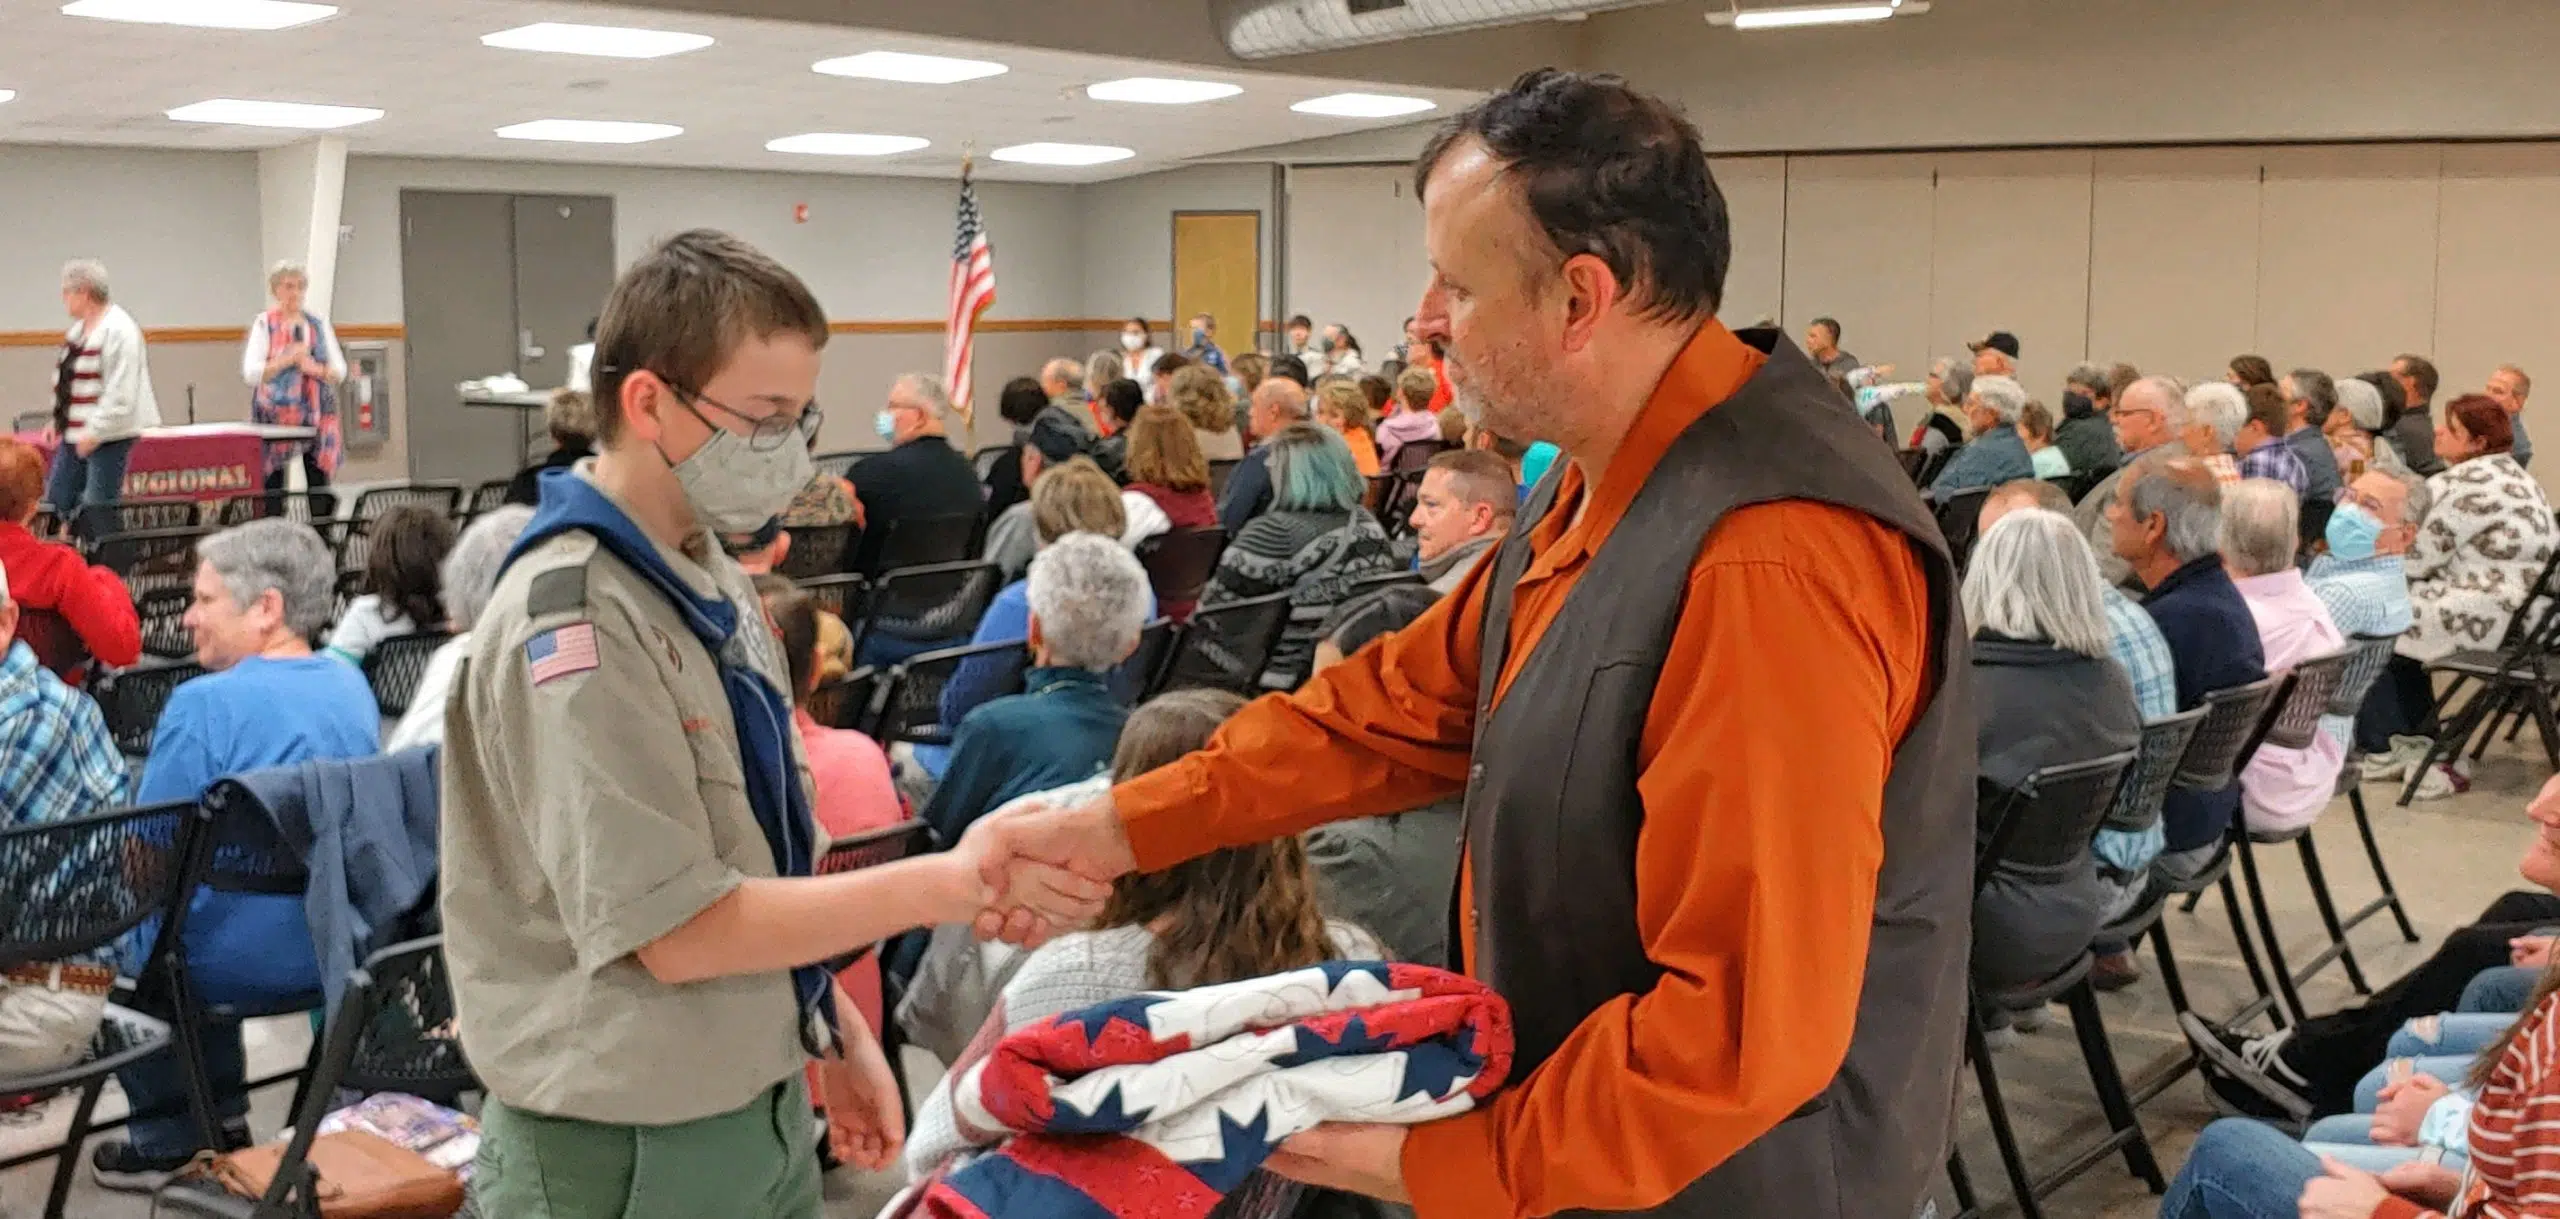 2021 All Veterans Tribute activities culminate with annual Quilts of Gratitude presentation Sunday